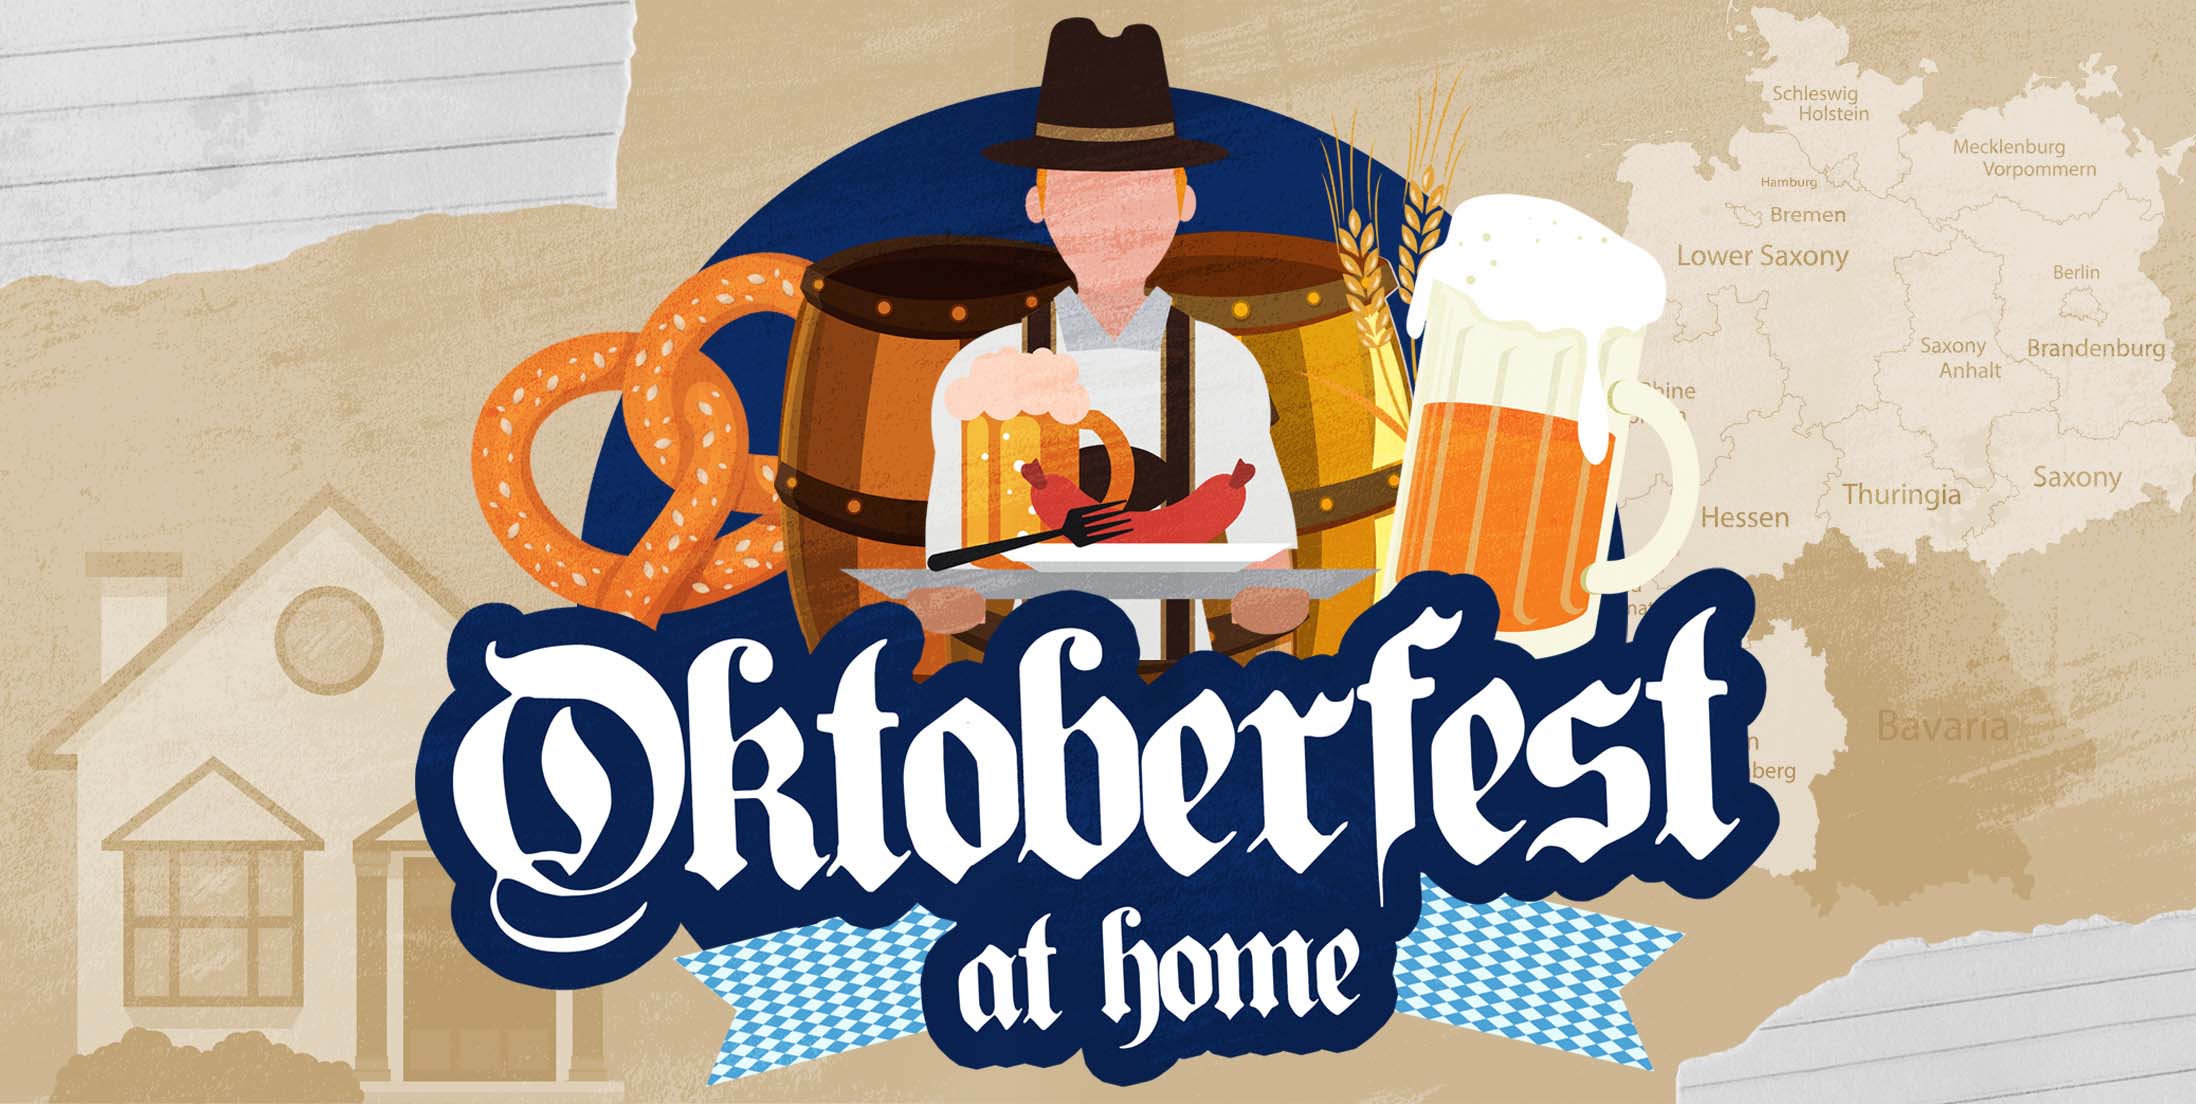 How to Have Oktoberfest at Home